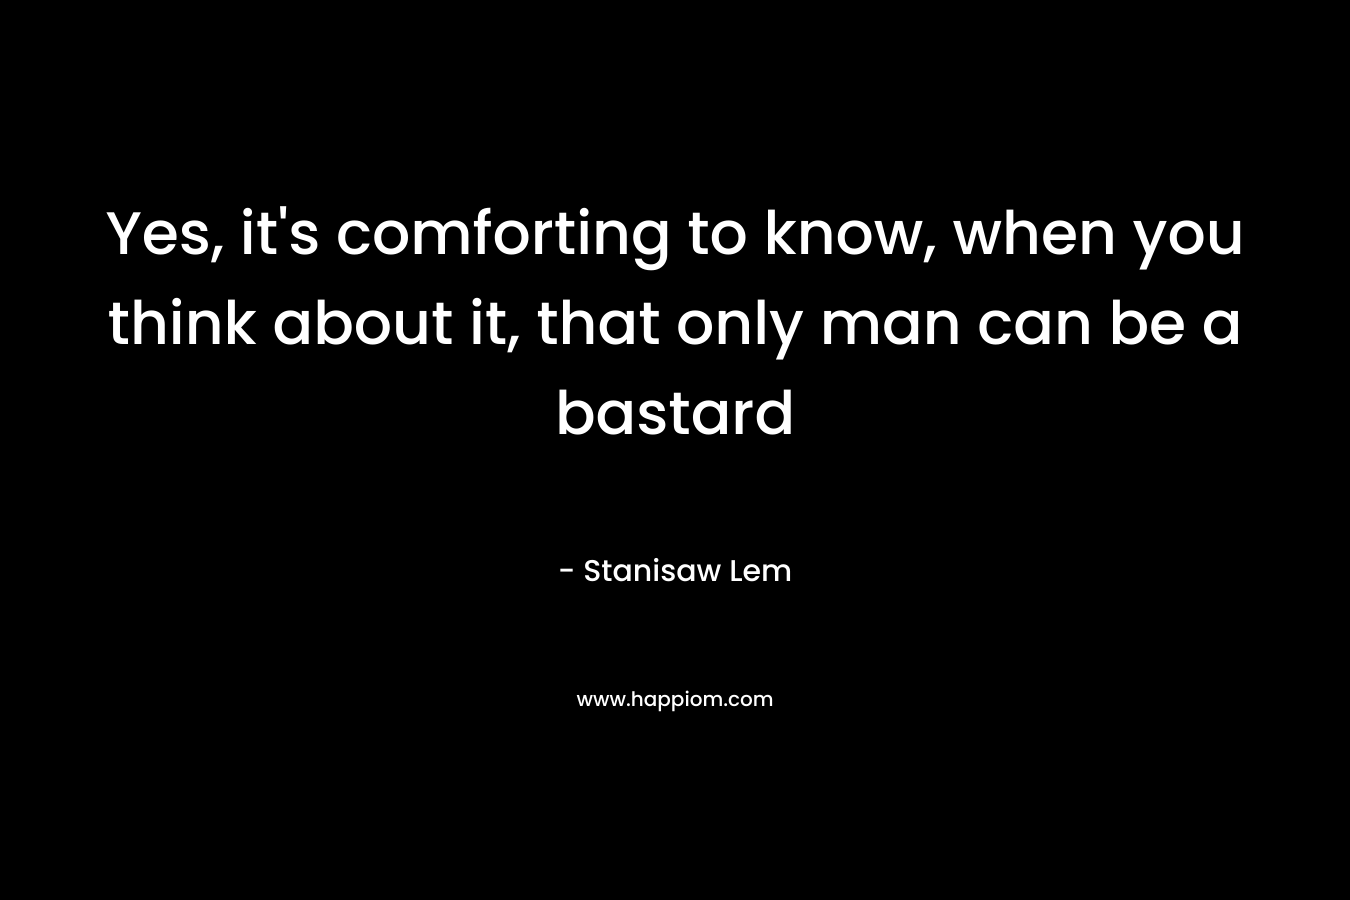 Yes, it’s comforting to know, when you think about it, that only man can be a bastard – Stanisaw Lem